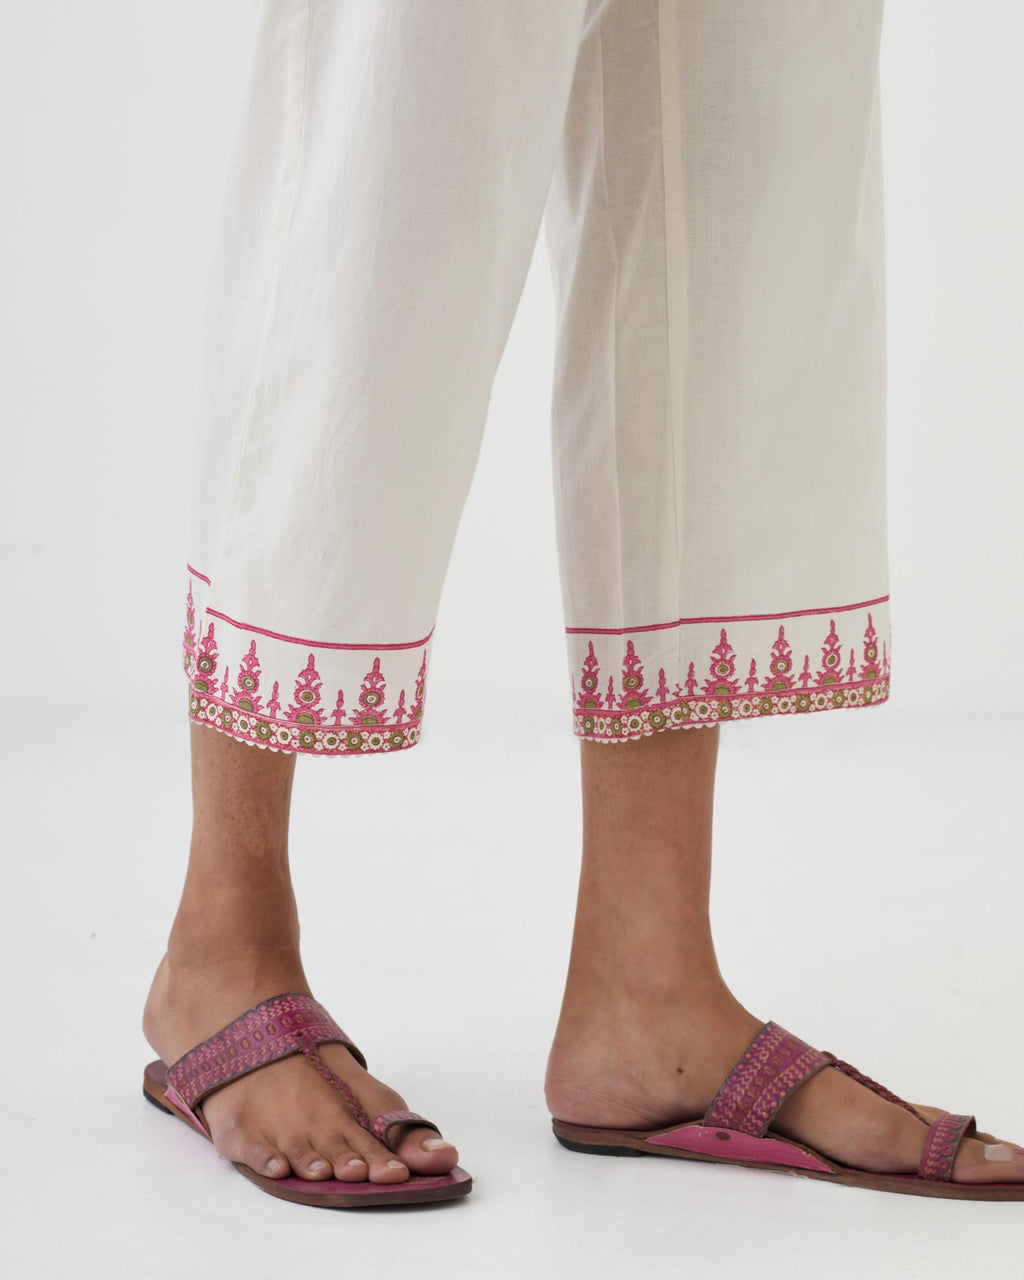 Off white cotton ankle length pants with hand block print detailing at bottom hem.